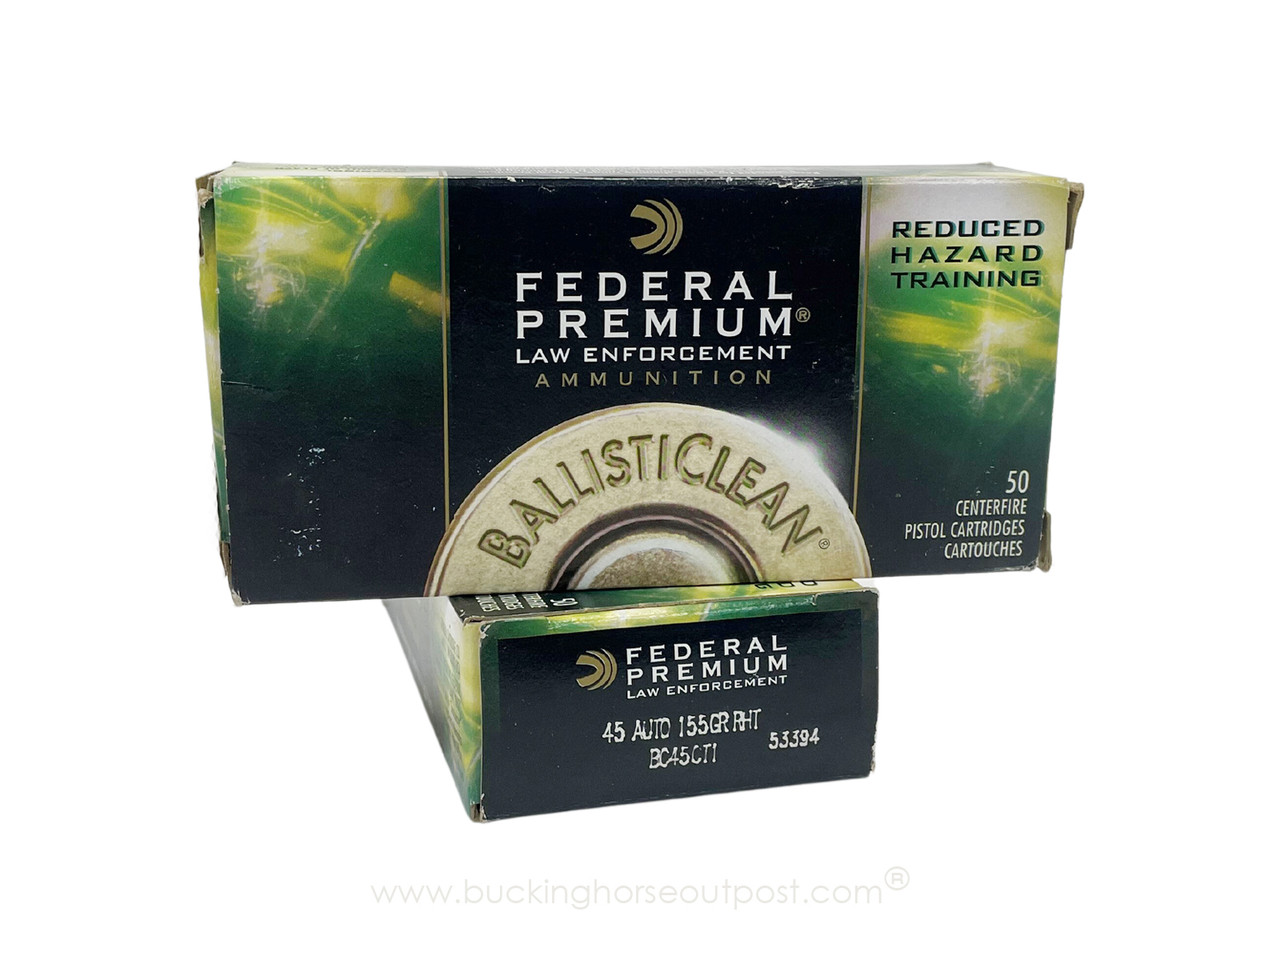 Federal Ballisticlean .45 Auto 155 Grain Reduced Hazard Training Frangible Ammunition 50rds Per Box (BC45CT1) - Police Trade In - FREE SHIPPING ON ORDERS OVER $175